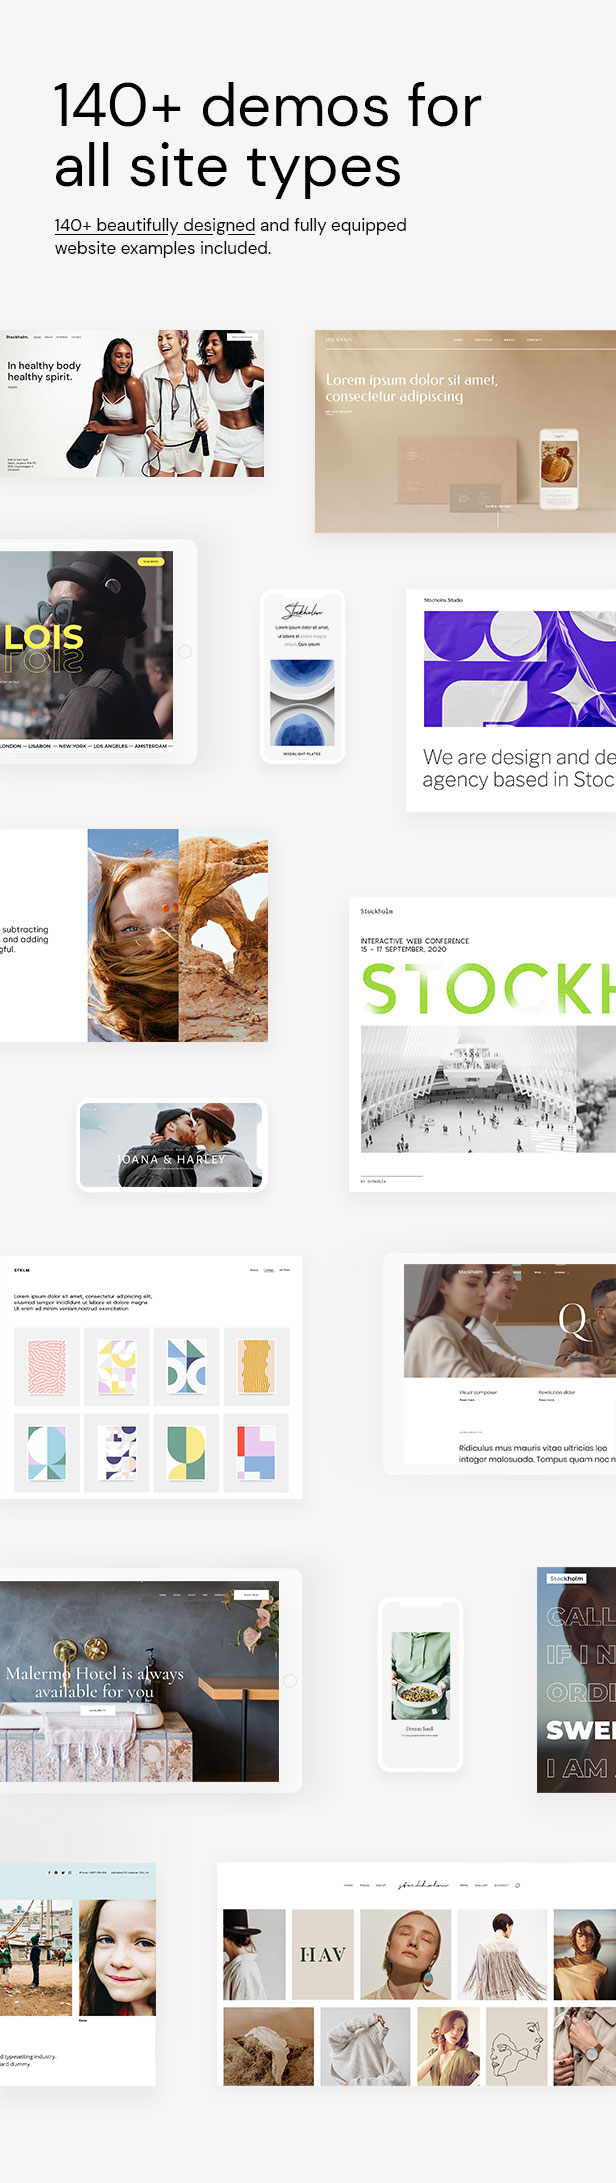 Stockholm Theme - A Genuinely Multi-Concept Theme - 2